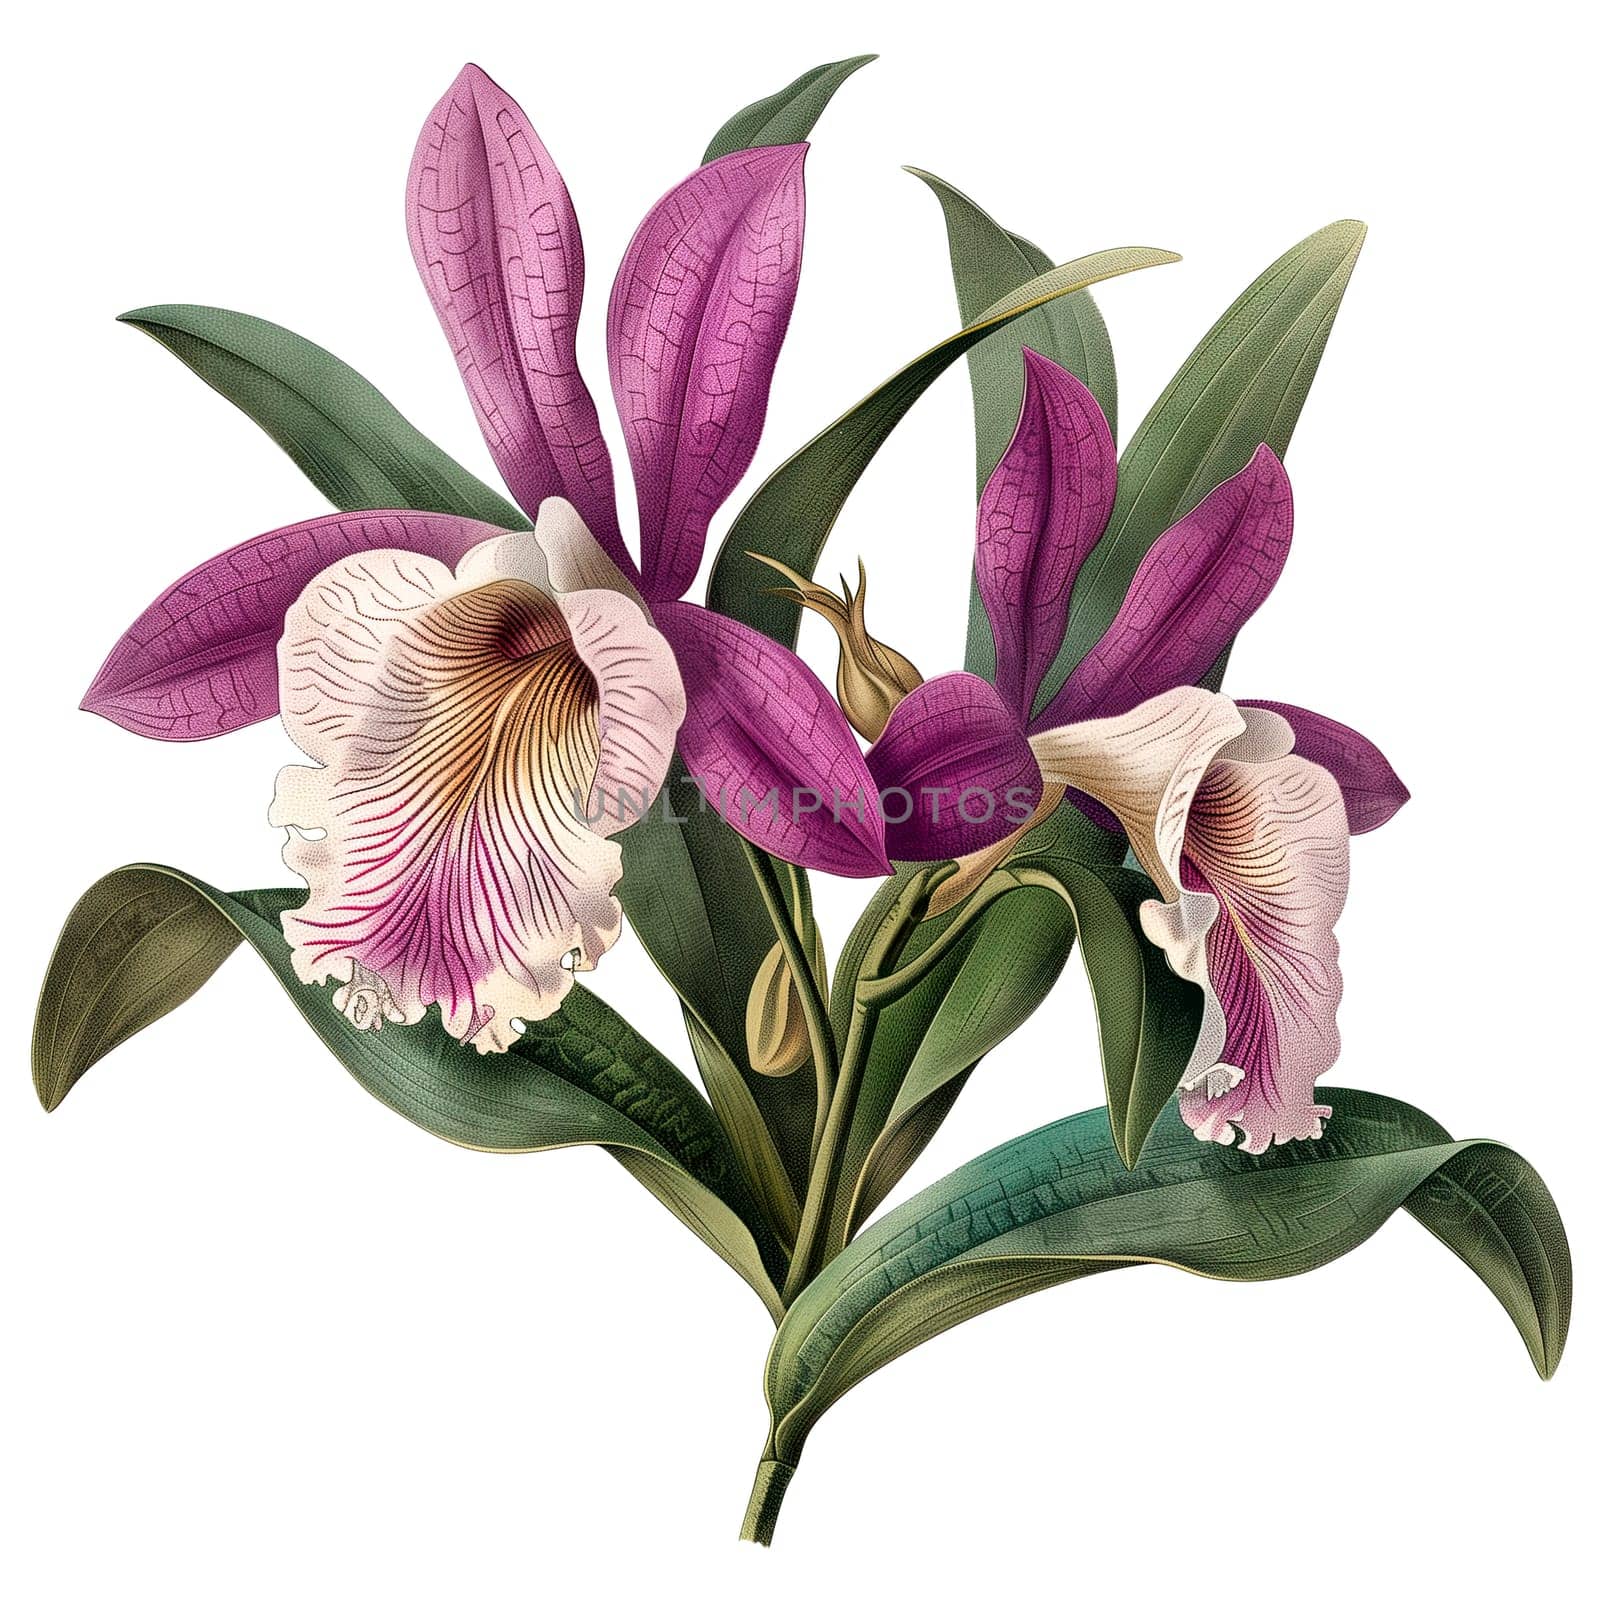 Isolated illustration of purple orchid flower by Dustick